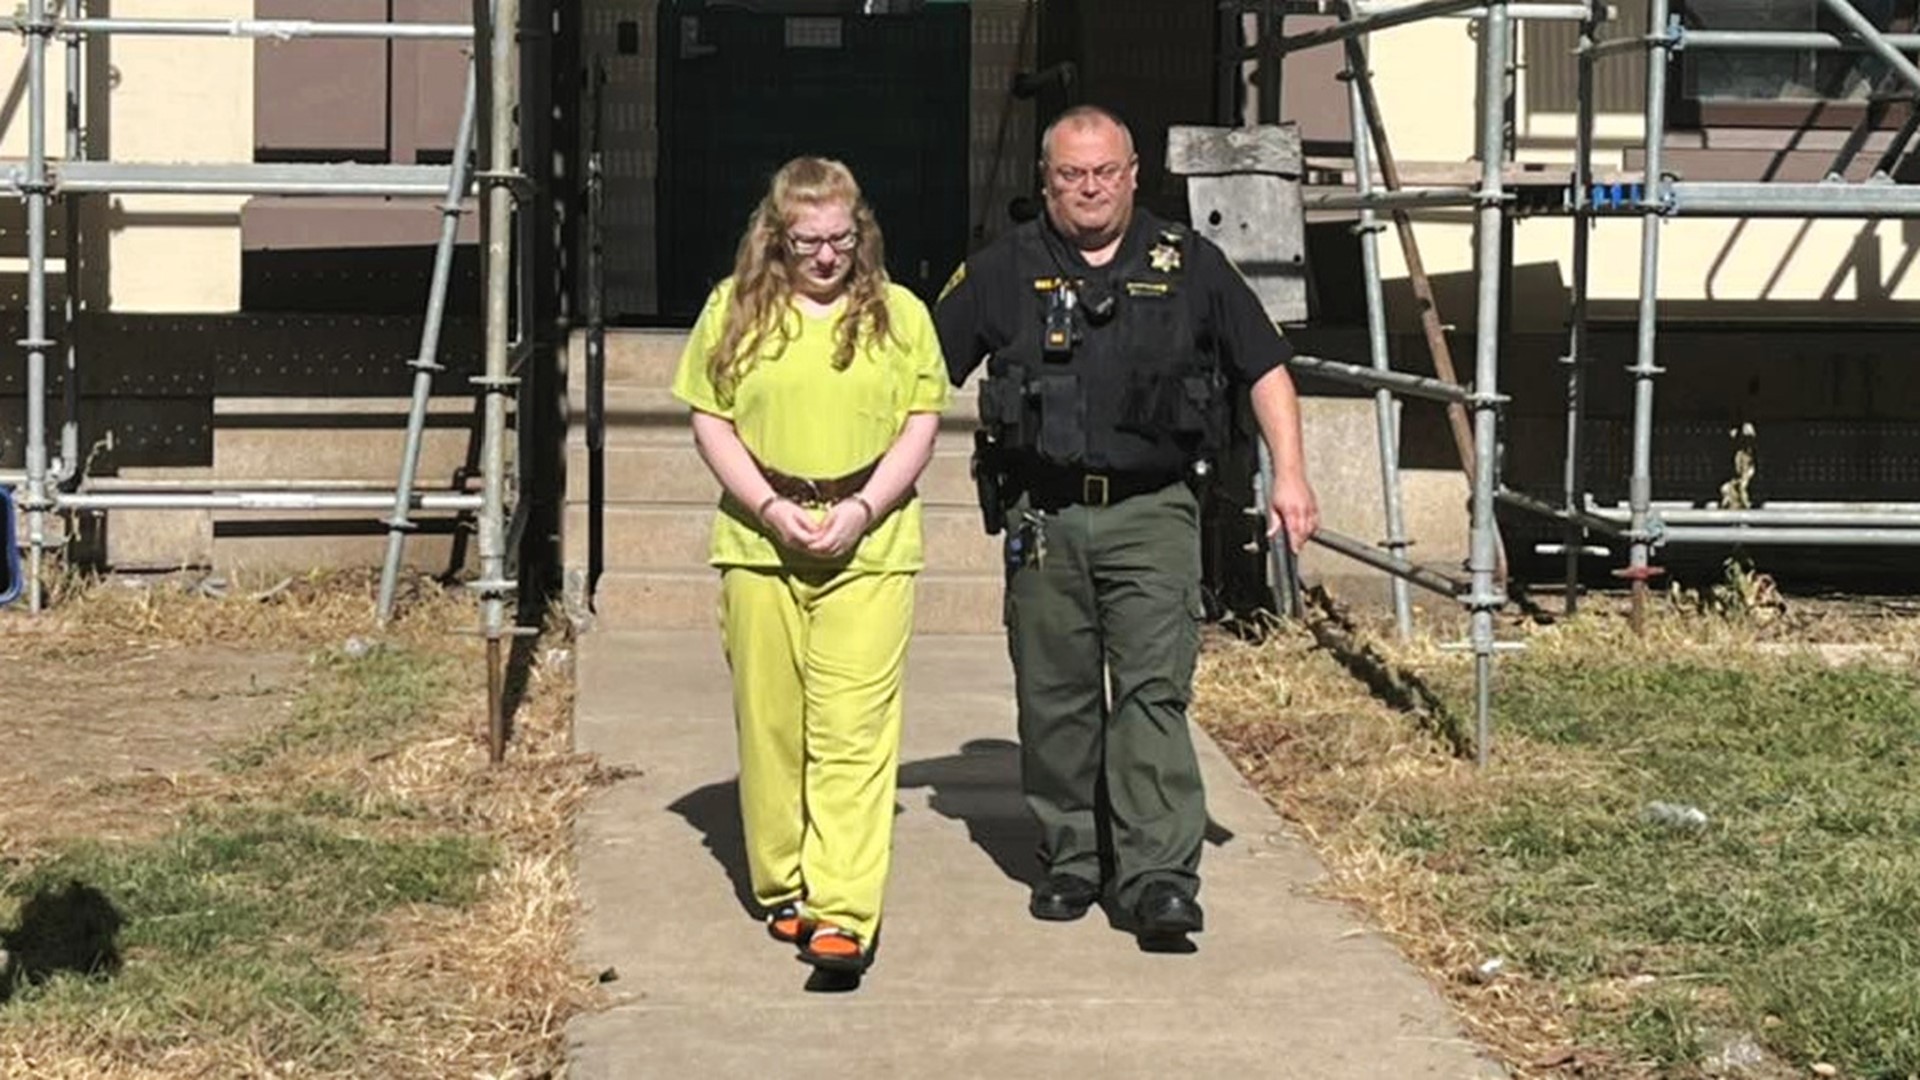 Samantha Delcamp was sentenced Friday morning in Northumberland County for the death of 3-year-old Arabella Parker.